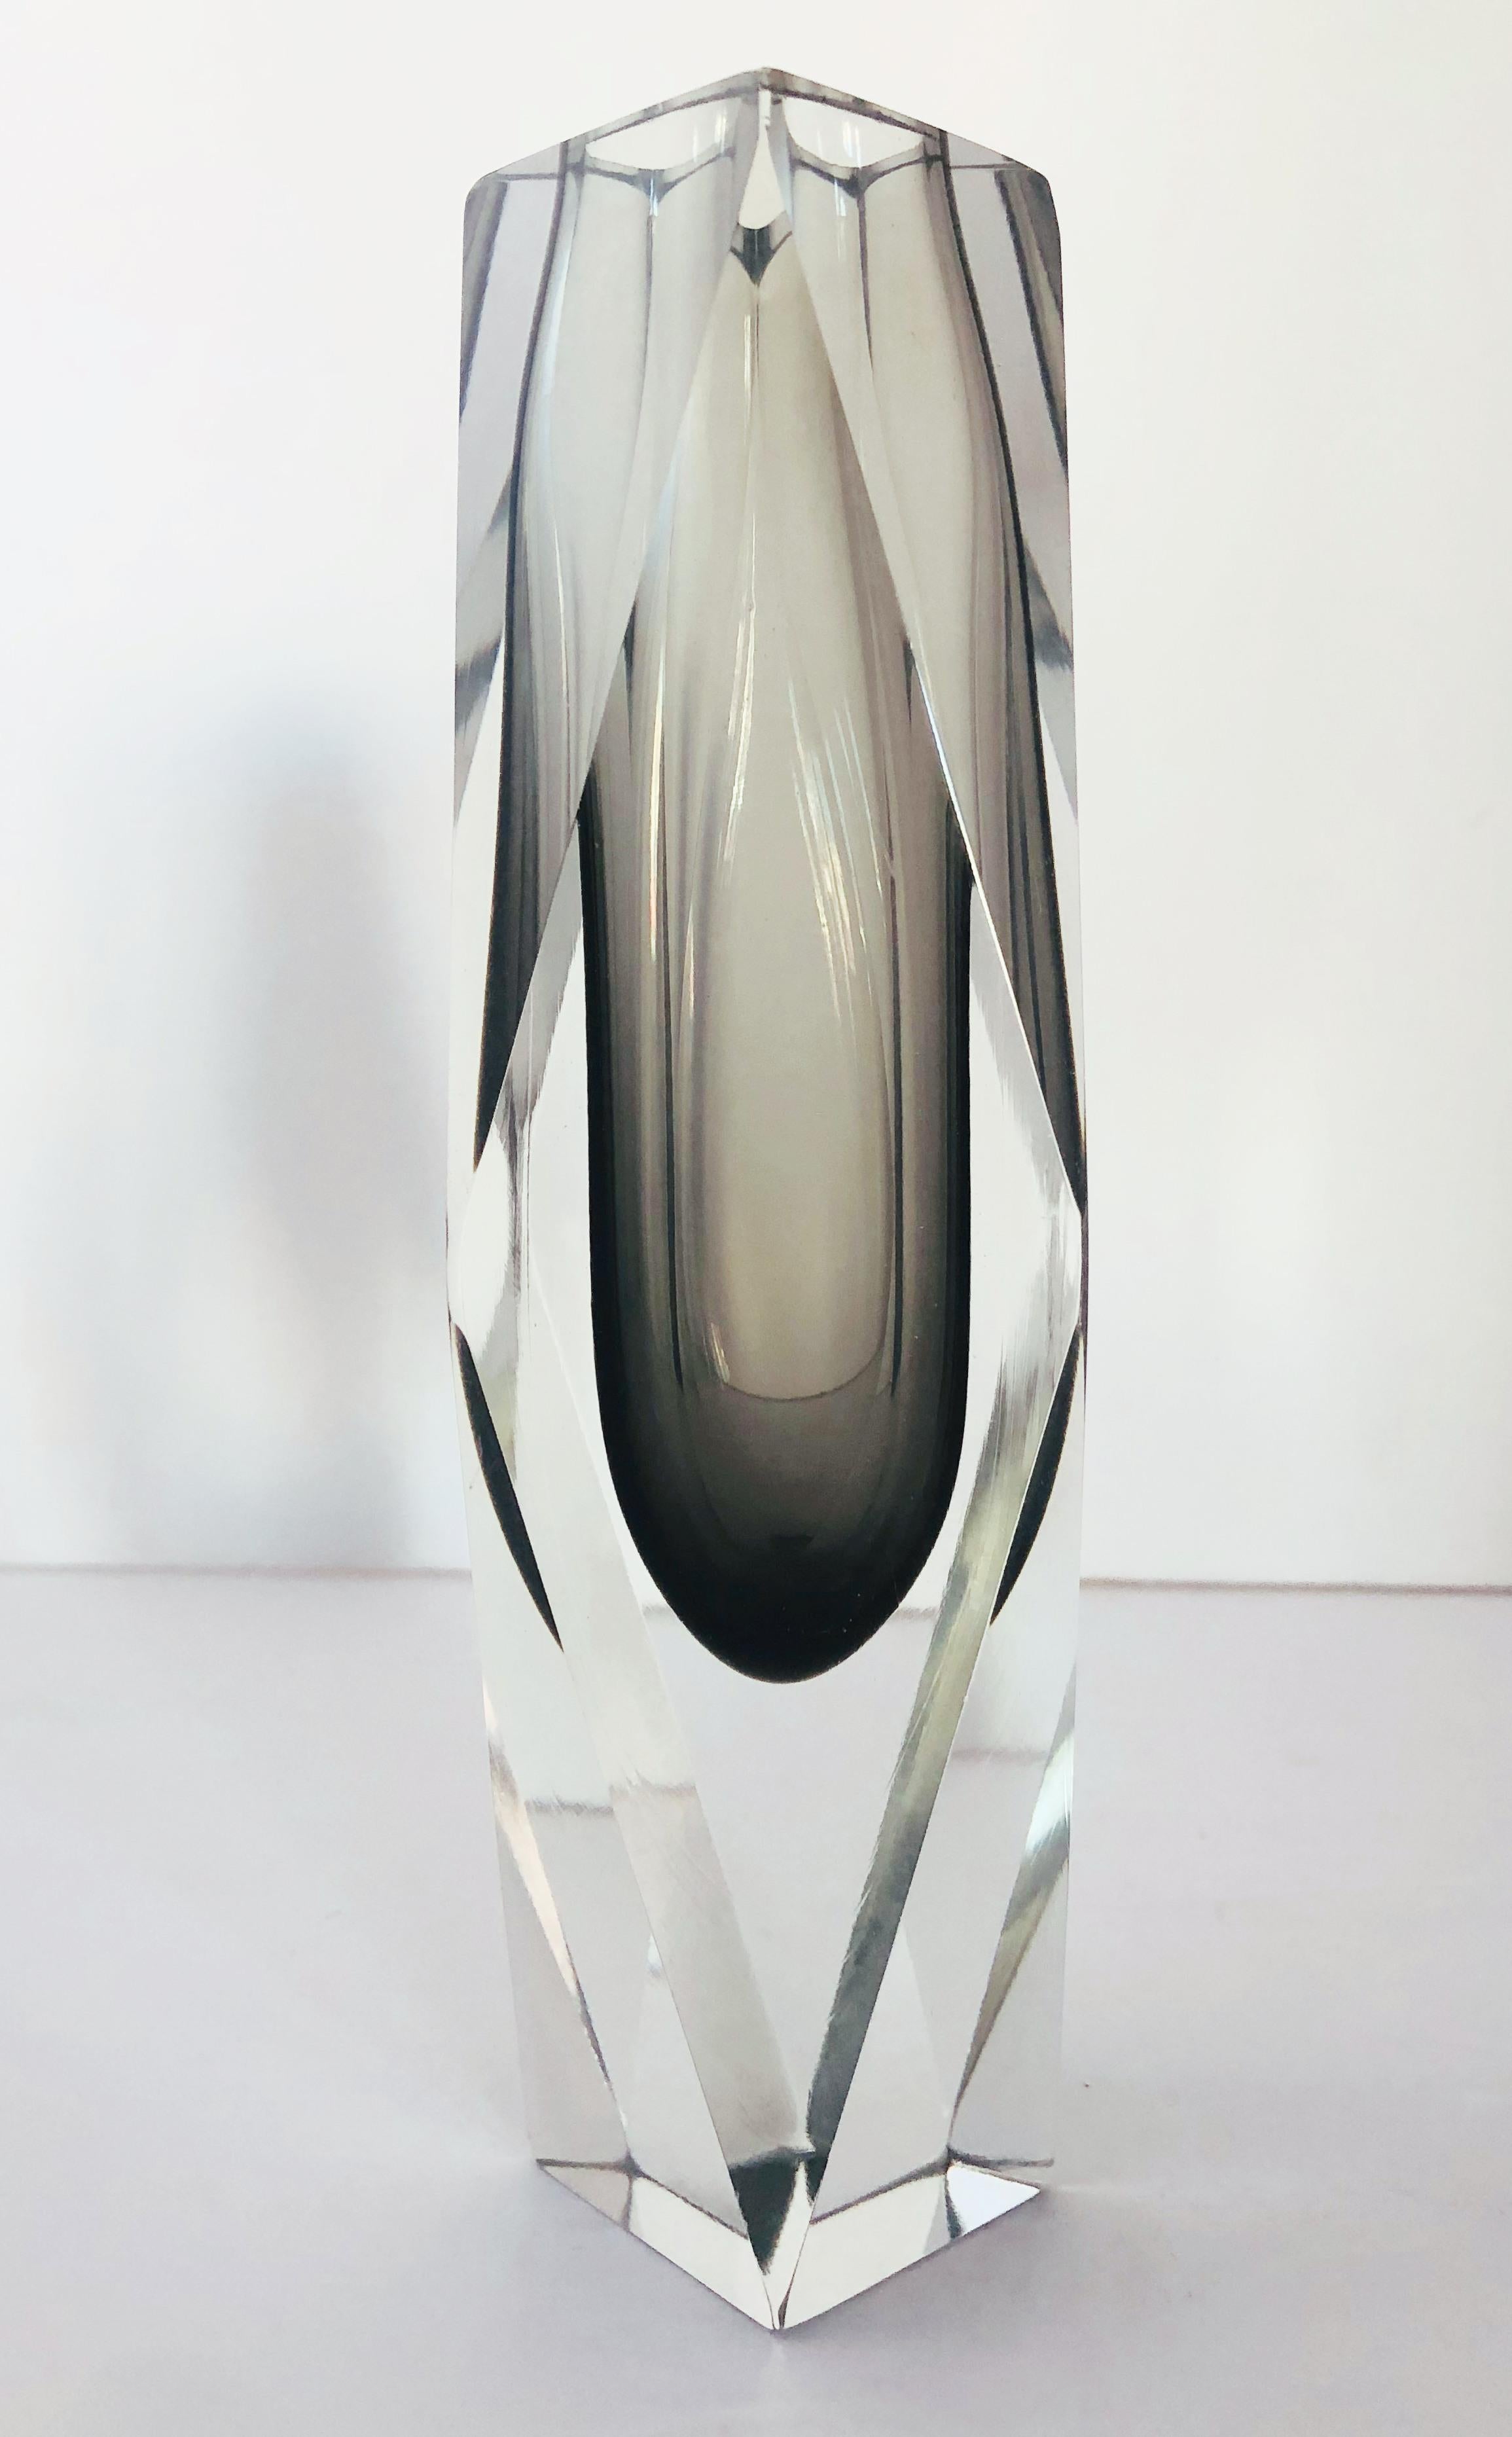 Vintage Italian smoky faceted Murano glass vase blown in Sommerso technique / Designed by Mandruzzato circa 1960s / Made in Italy
Measures: Height 8 inches / diameter 2.5 inches
1 in stock in Palm Springs currently ON FINAL CLEARANCE SALE for $399